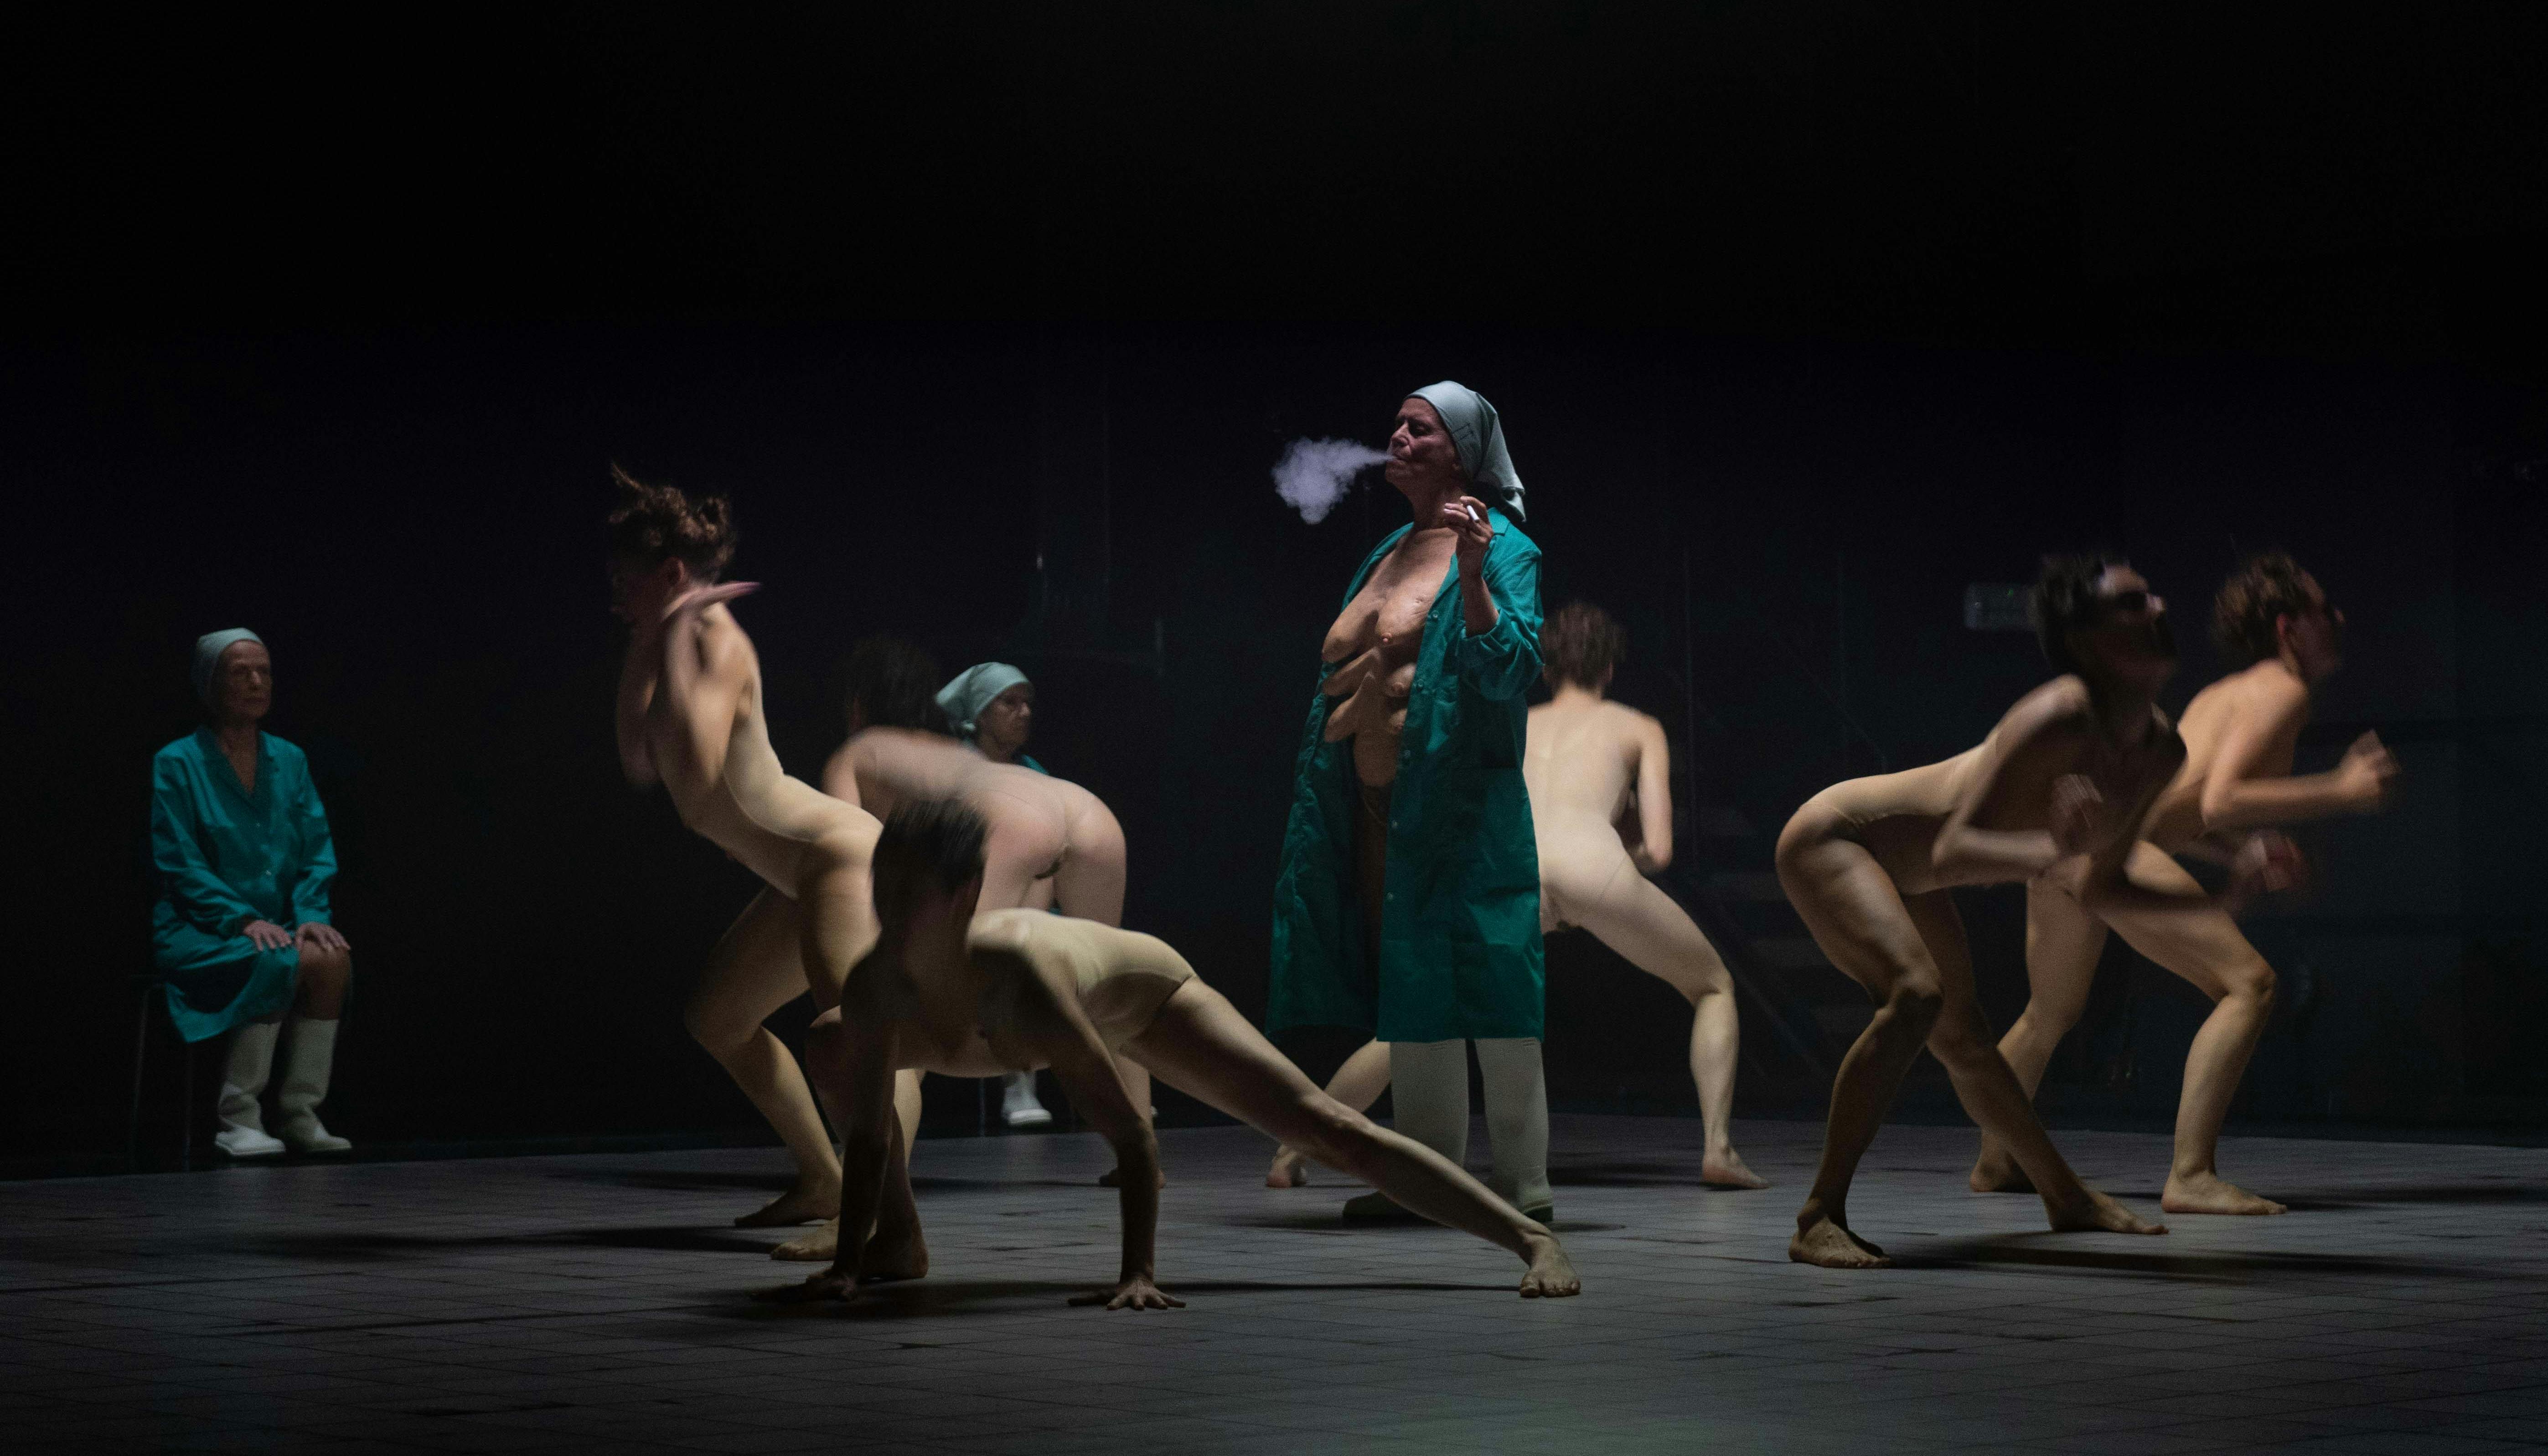 Some naked human bodies dance in a circle, facing outward. In the center is an elderly woman in a lab coat, smoking a cigarette. Under the gown she is naked; multiple pairs of breasts are visible on her chest.